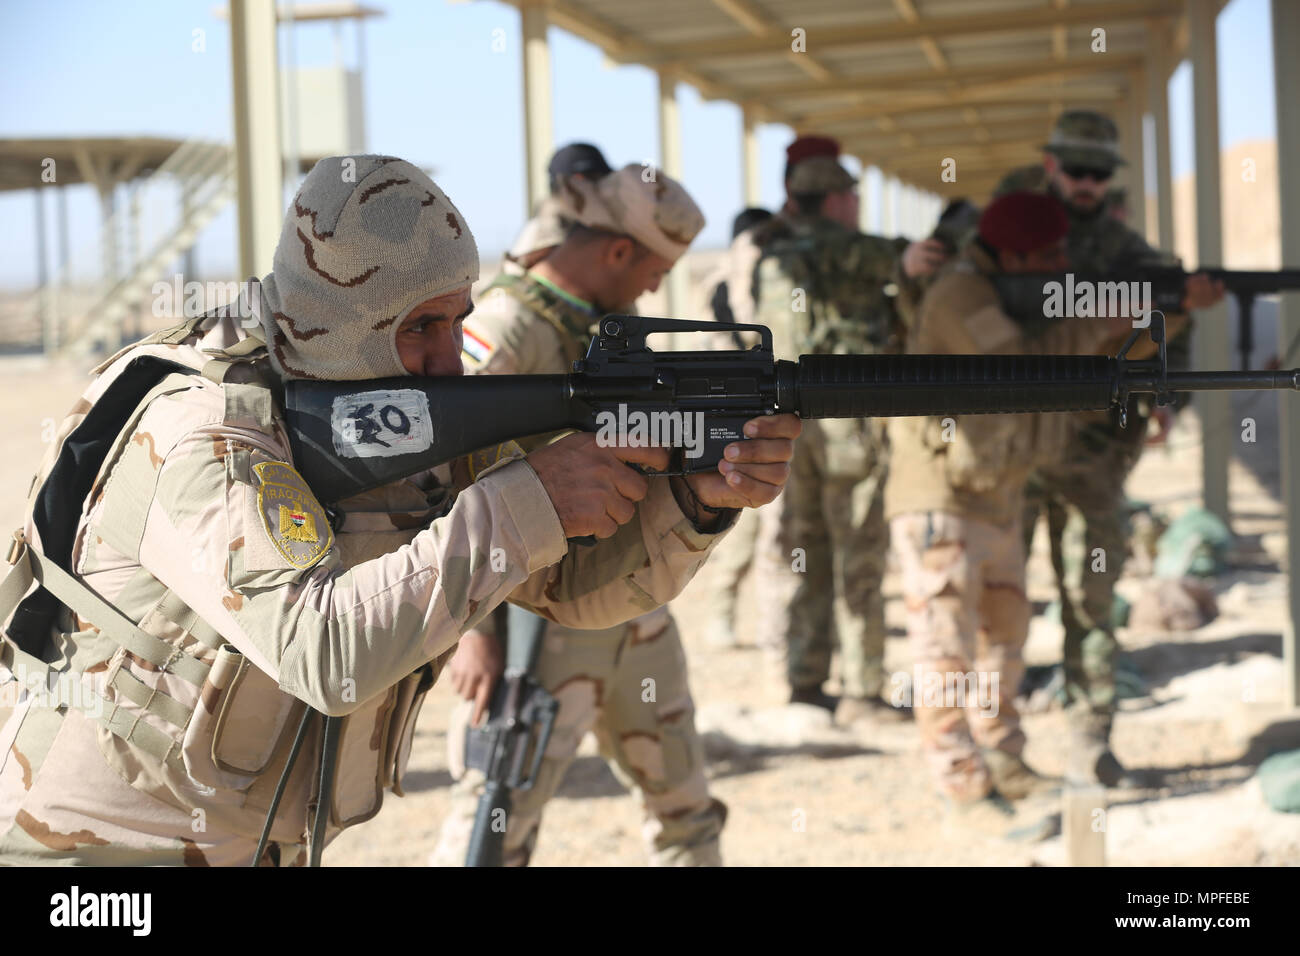 Iraqi security forces soldiers practice the standing position during weapons training at Al Asad Air Base, Iraq, Feb. 23, 2017.  This training is part of the overall Combined Joint Task Force – Operation Inherent Resolve building partner capacity mission to train and improve the capability of partnered forces fighting ISIS. CJTF-OIR is the global Coalition to defeat ISIS in Iraq and Syria. (U.S. Army photo by Sgt. Lisa Soy) Stock Photo